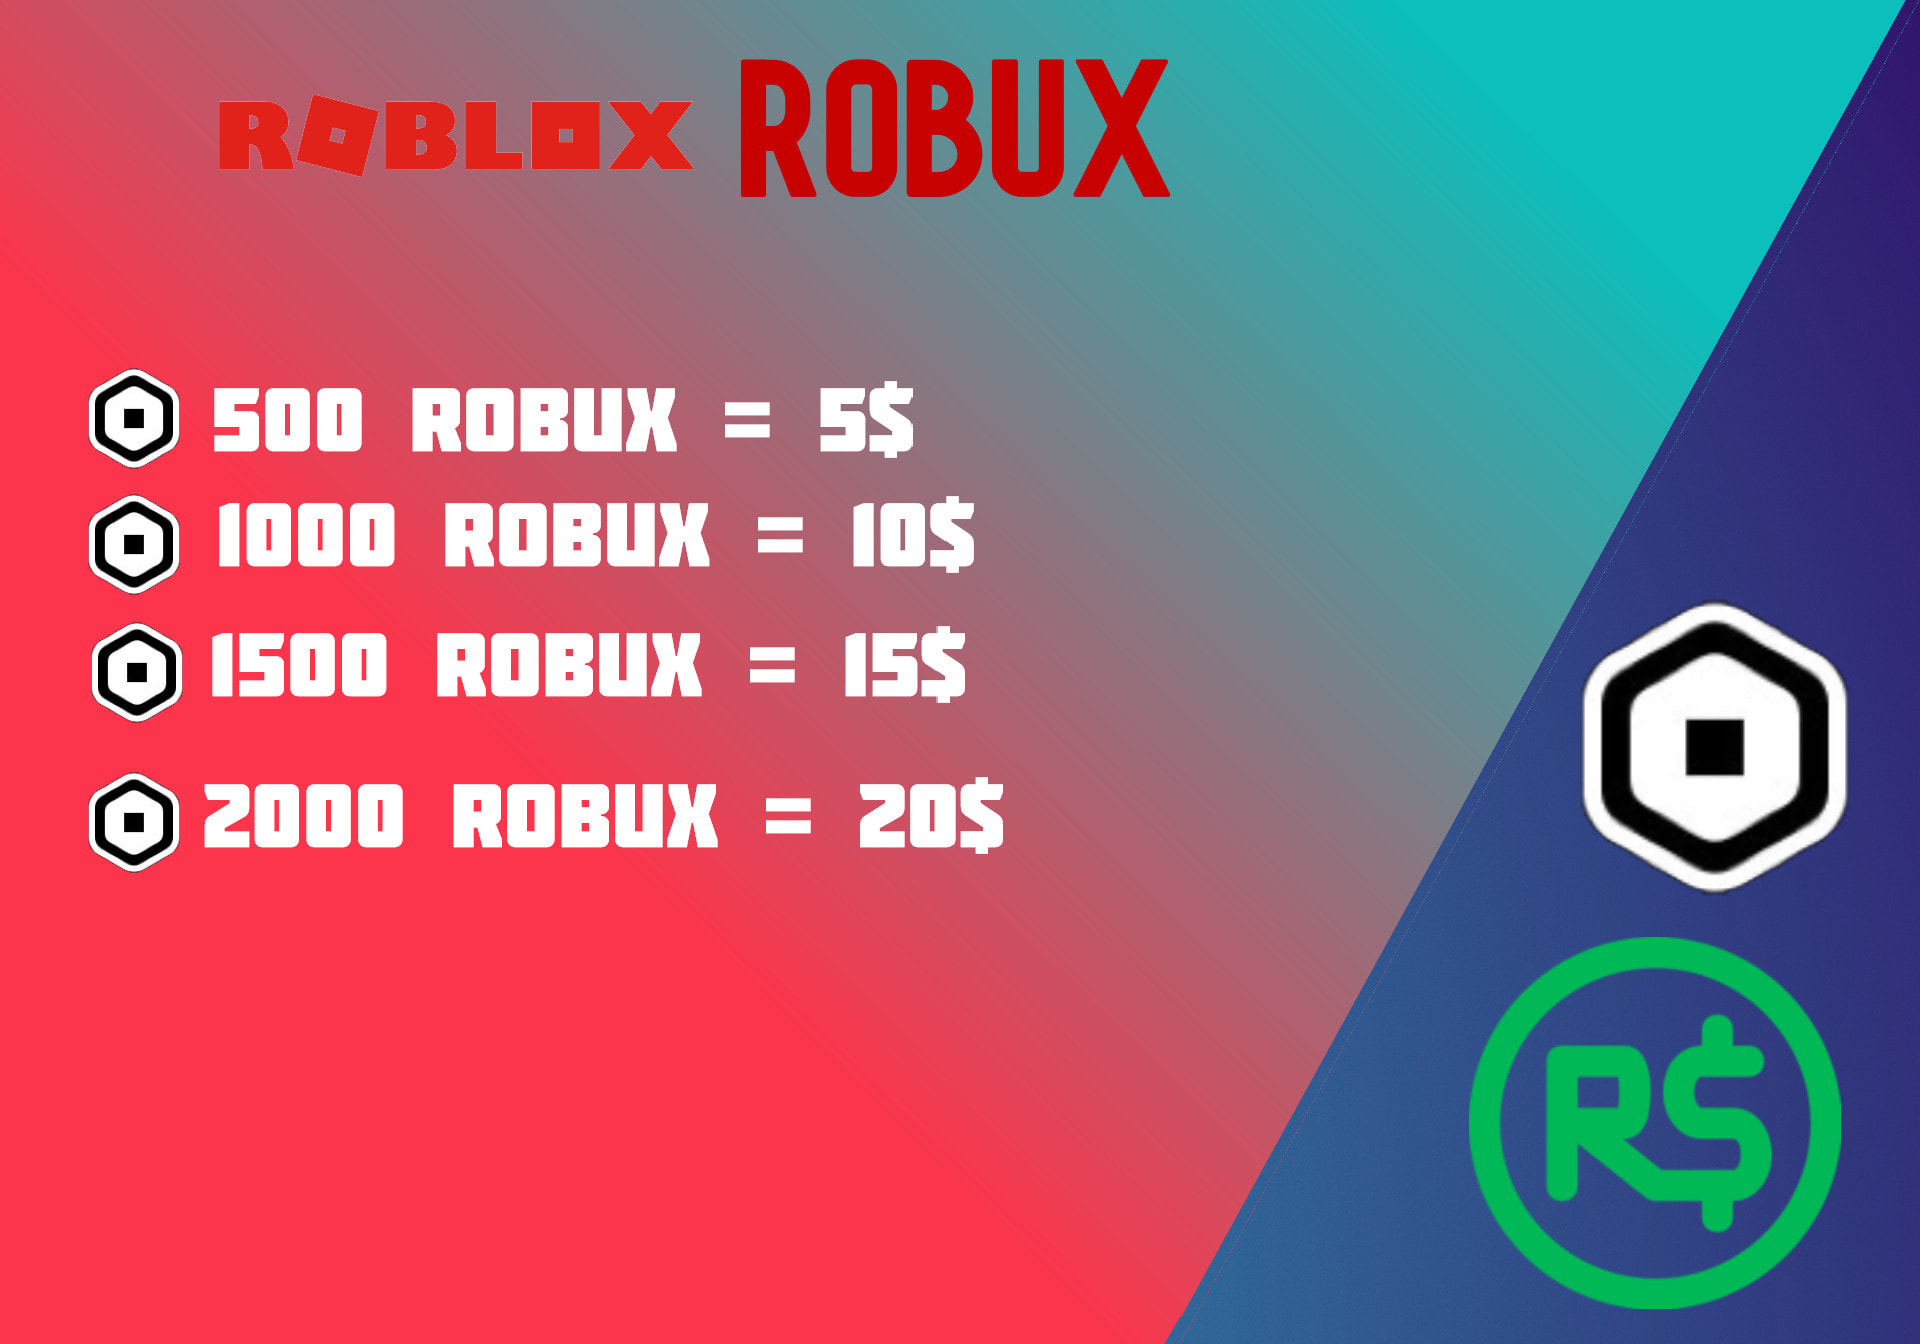 Sell Robux For Who Needs Robux Come Buy This By Dragontecz - roblox robux sale get 20 robux